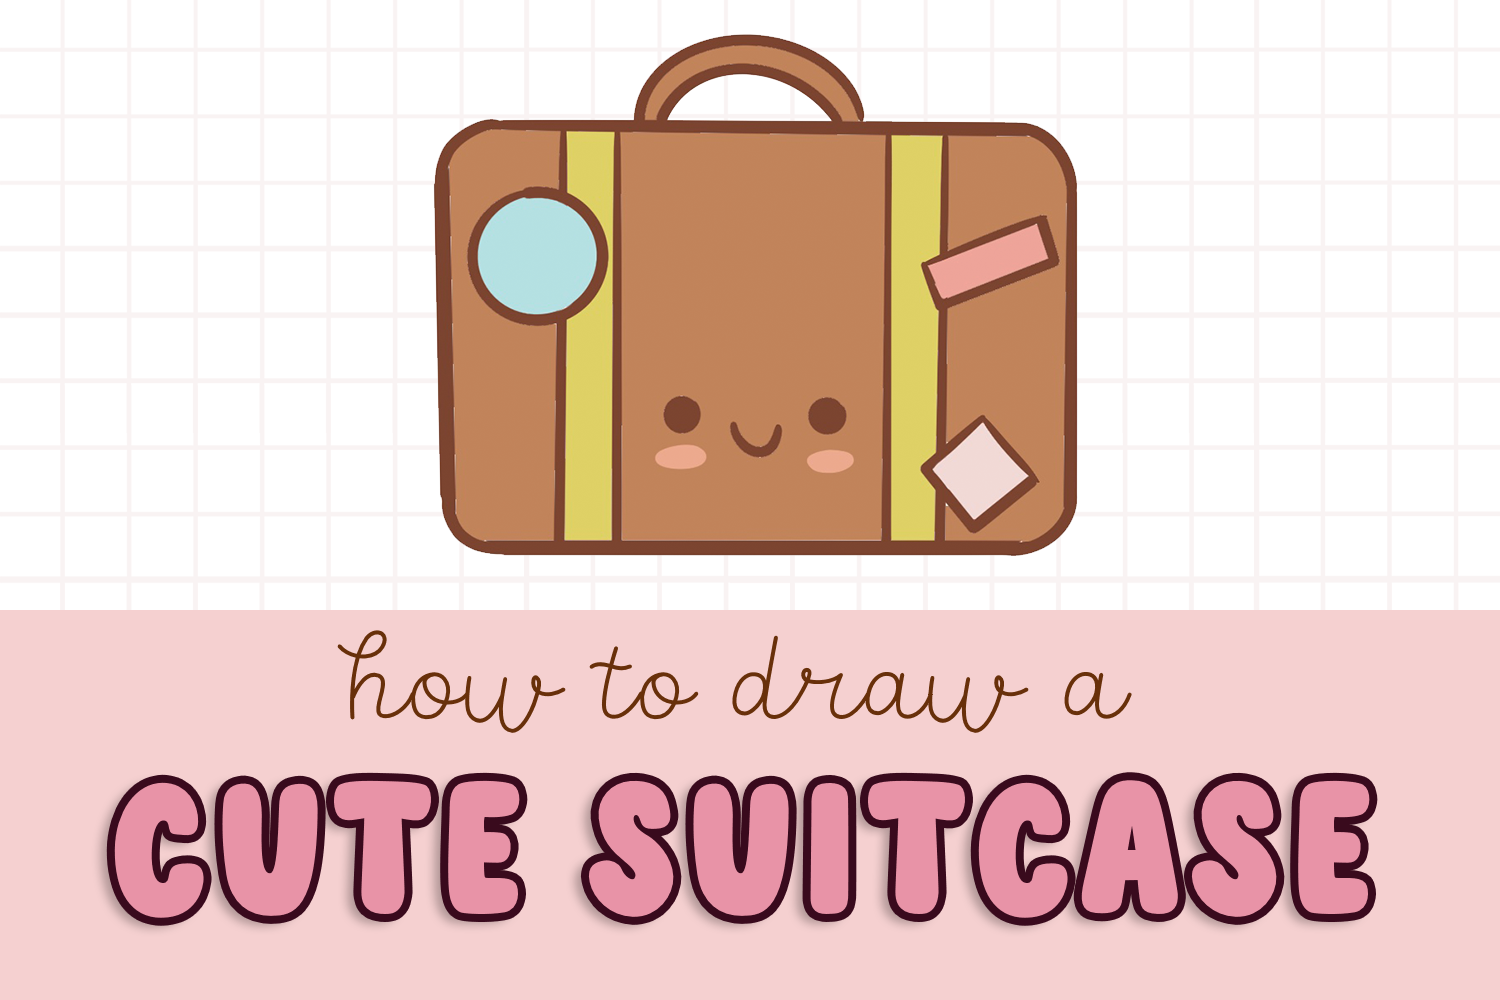 How to Draw a Cute Suitcase (Easy Beginner Guide)